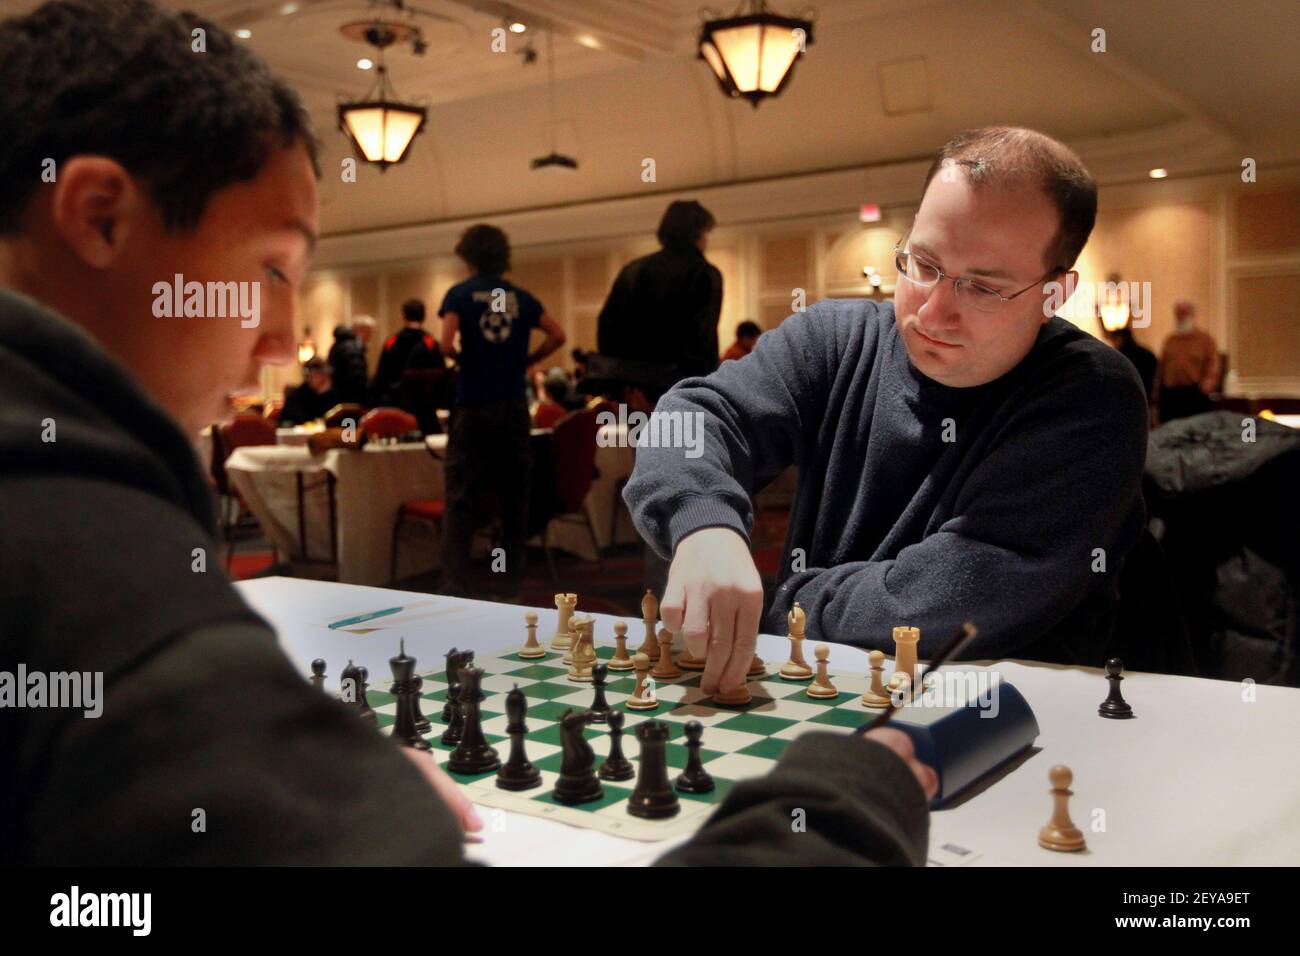 Feb 16, 2013 - St Paul, MN - Sean Nagle, right, who has been Minnesota chess champion or co-champion for the past four years (currently he's champion) defends his title, at the Minnesota Open Chess Tournament at the Crown Plaza in St. Paul, Minnesota, February 16, 2013. Here, he opened the tournament against Kyler Weatherspoon. Photo Credit: Tom Wallace/Minneapolis Star Tribune/MCT/Sipa USA Stock Photo